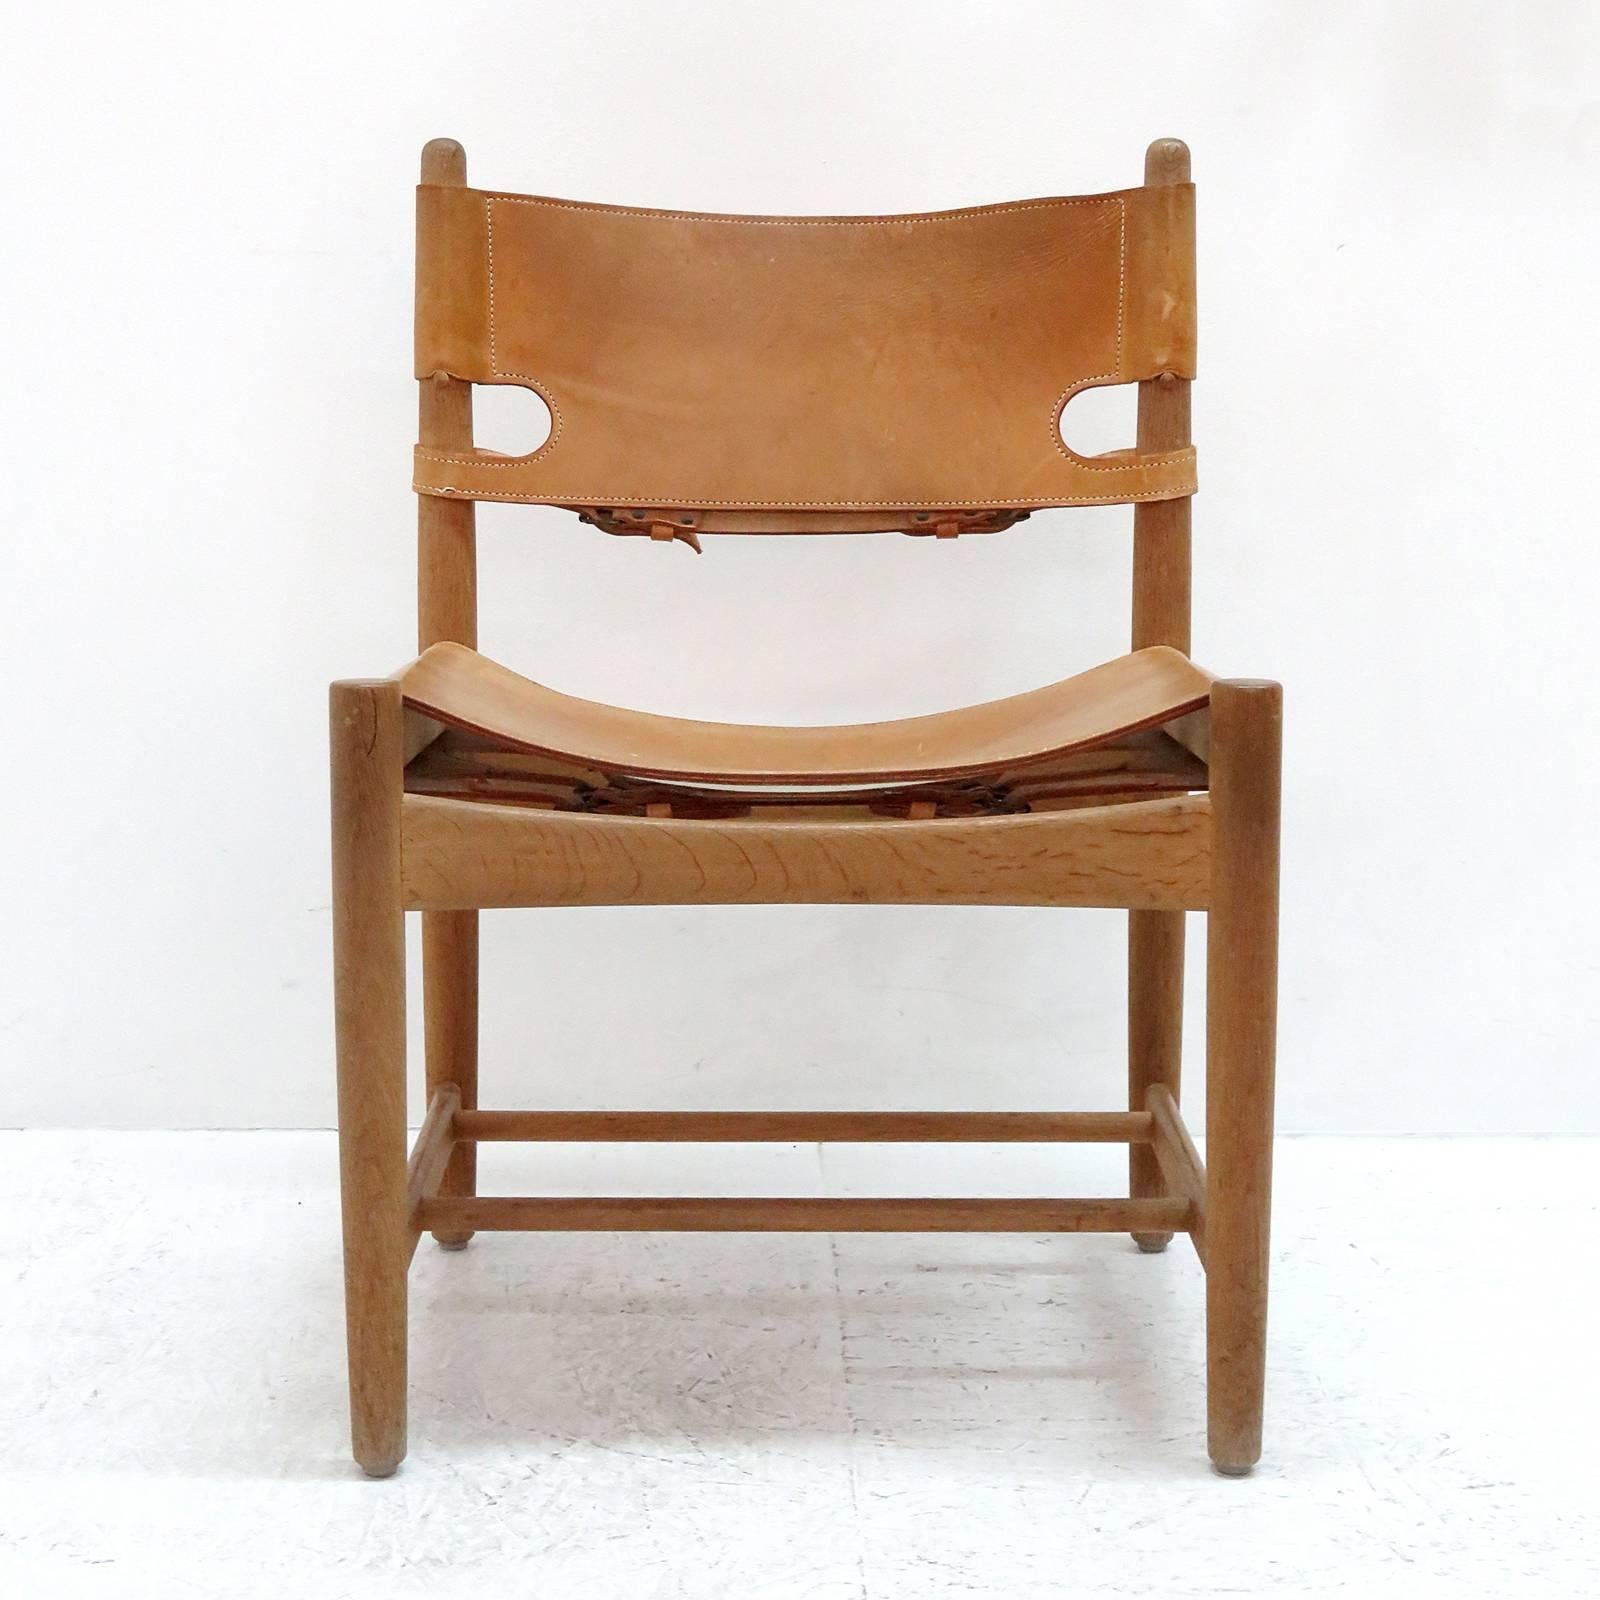 Wonderful set of six Børge Mogensen 'Hunting' chairs, model no. 3237 for Fredericia Furniture, with saddle leather on oak frames, great patina.